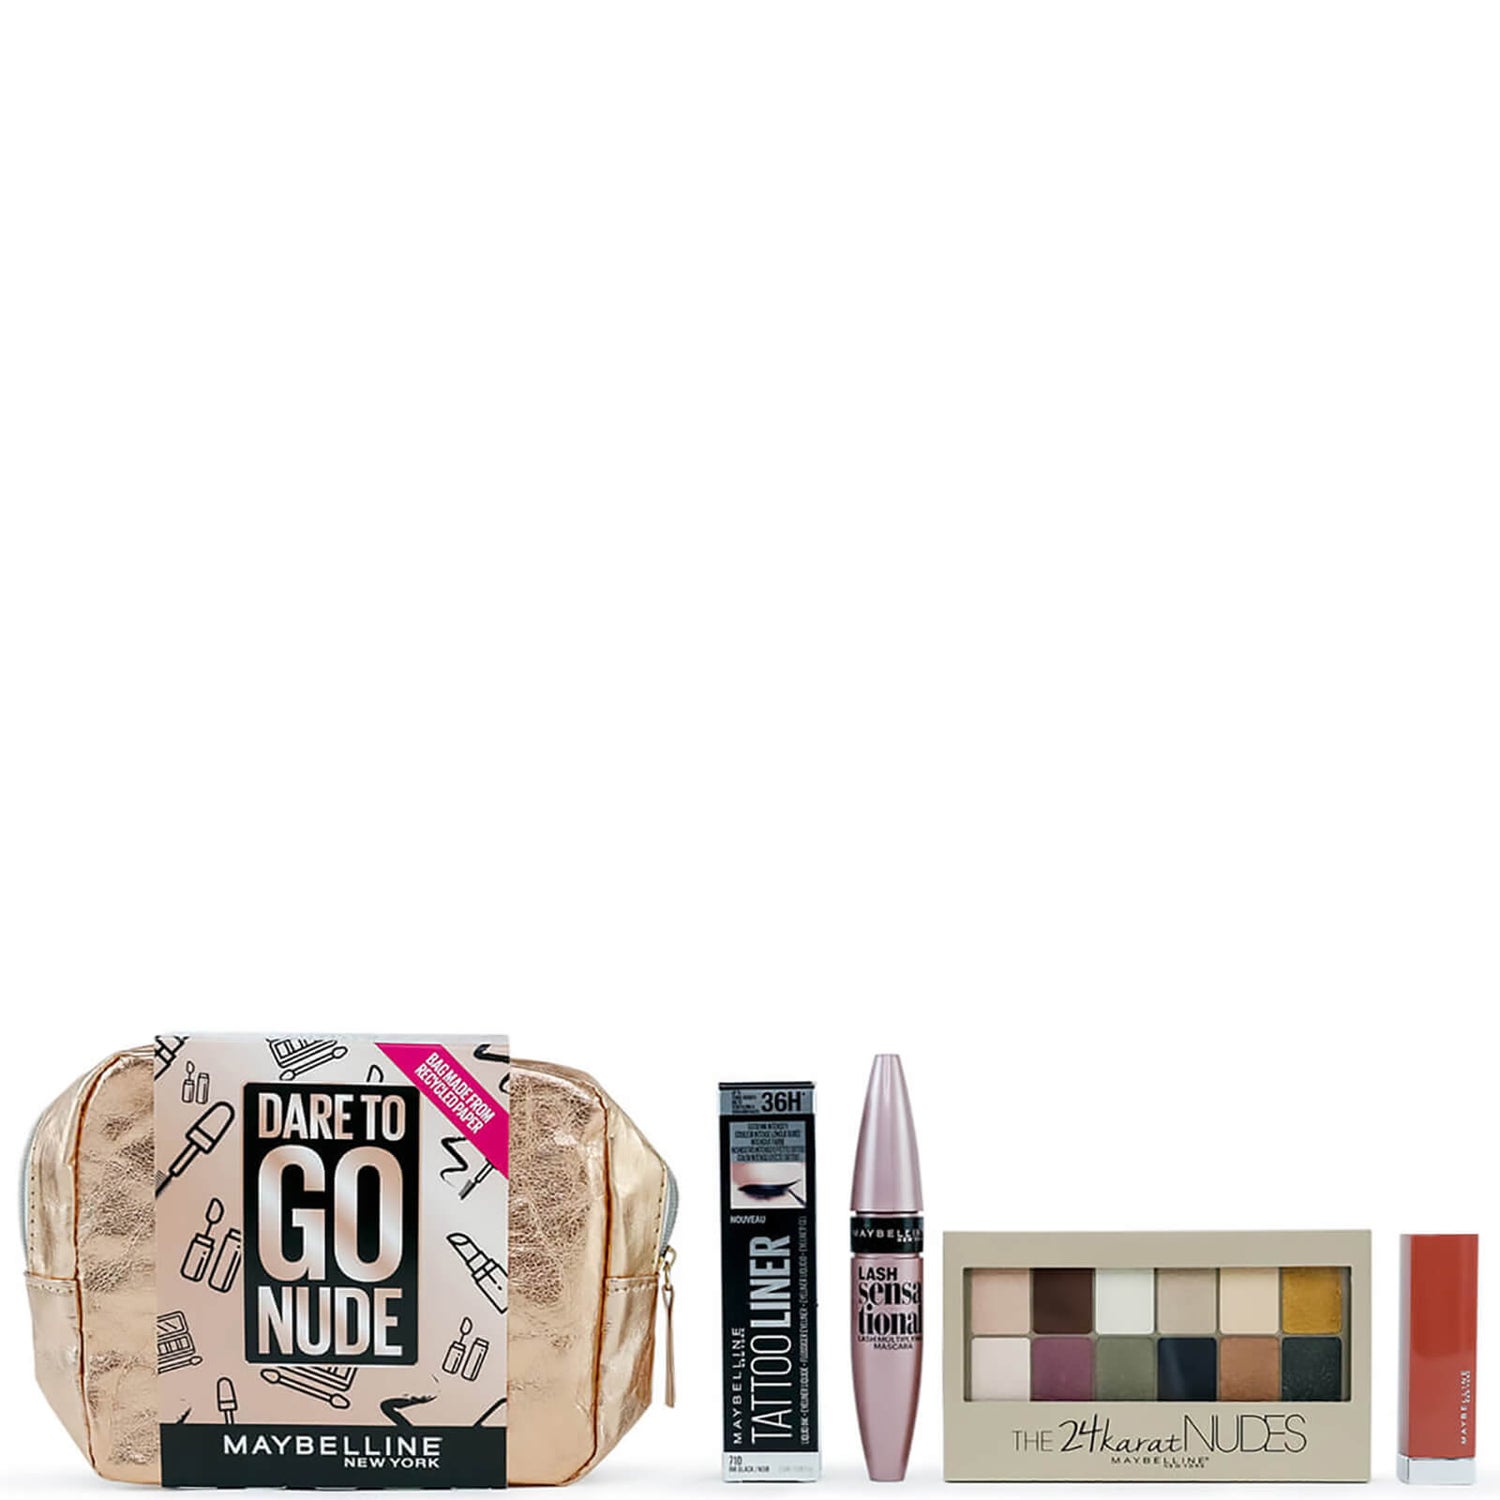 Maybelline Makeup Dare To Go Nude Gift Set for Her (Worth £40.00)